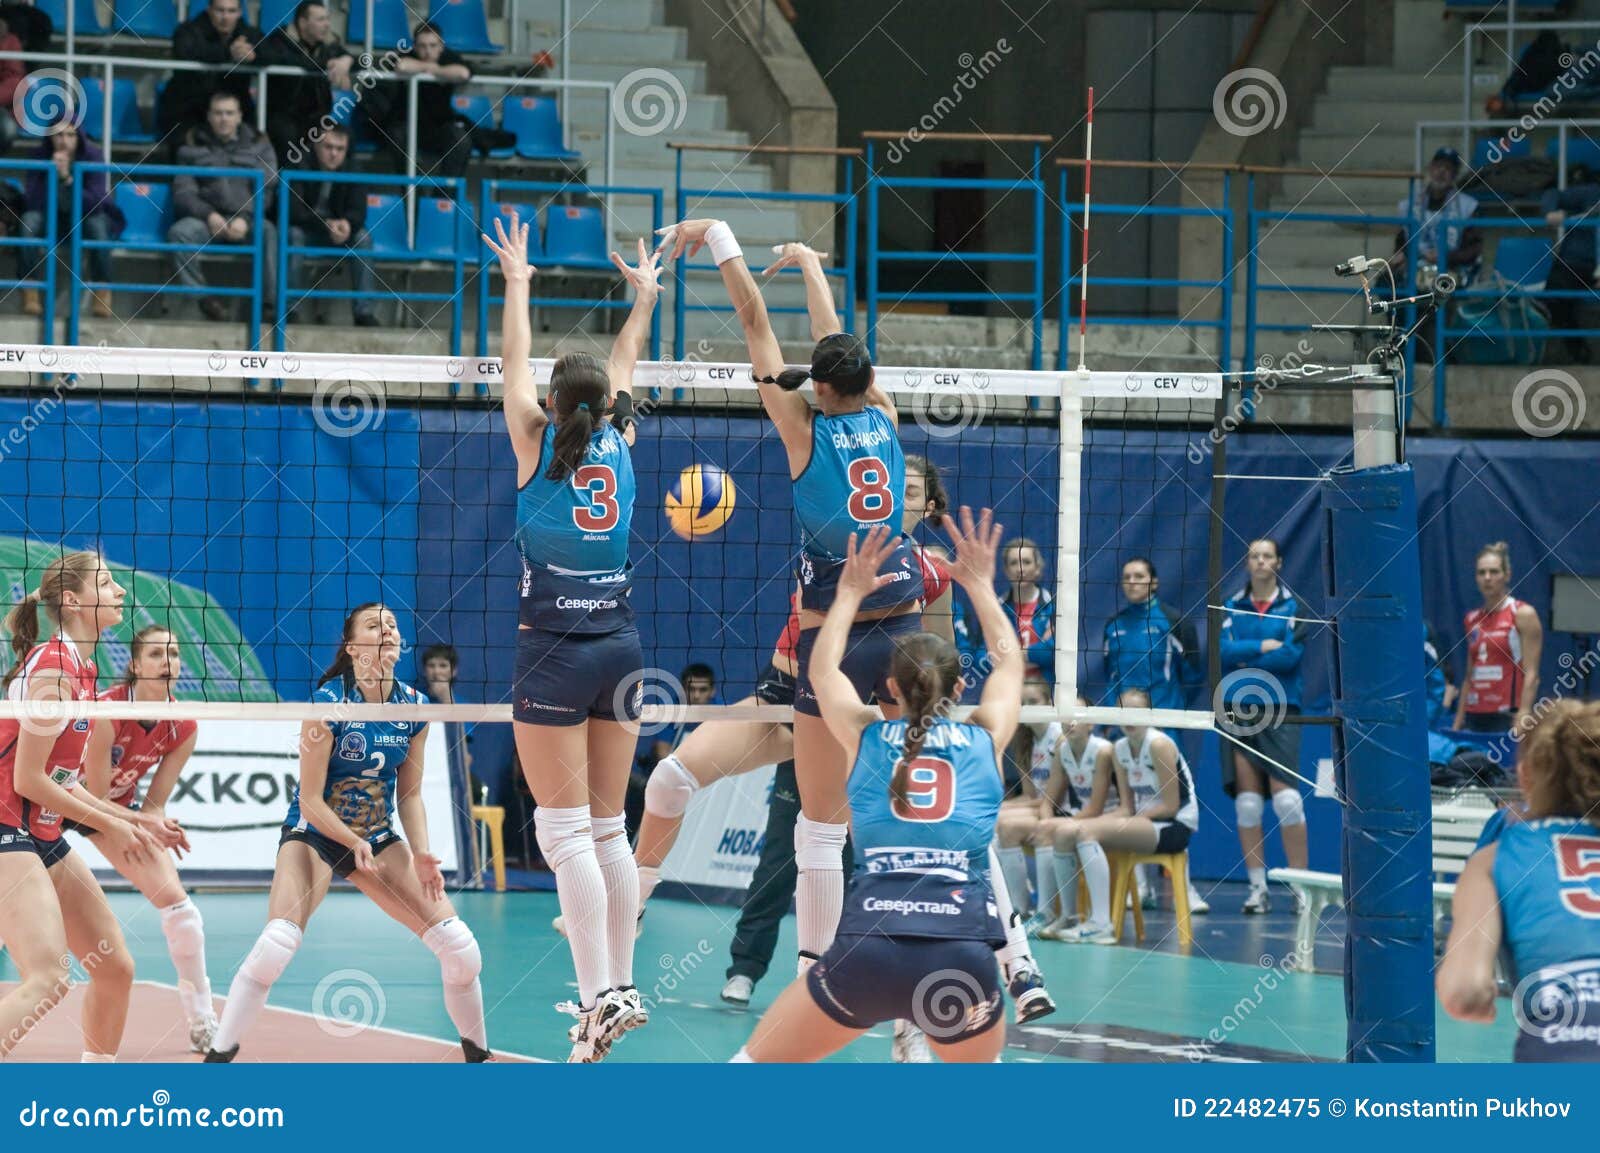 Download this Unidentified Players Action Cev European Chandions League picture